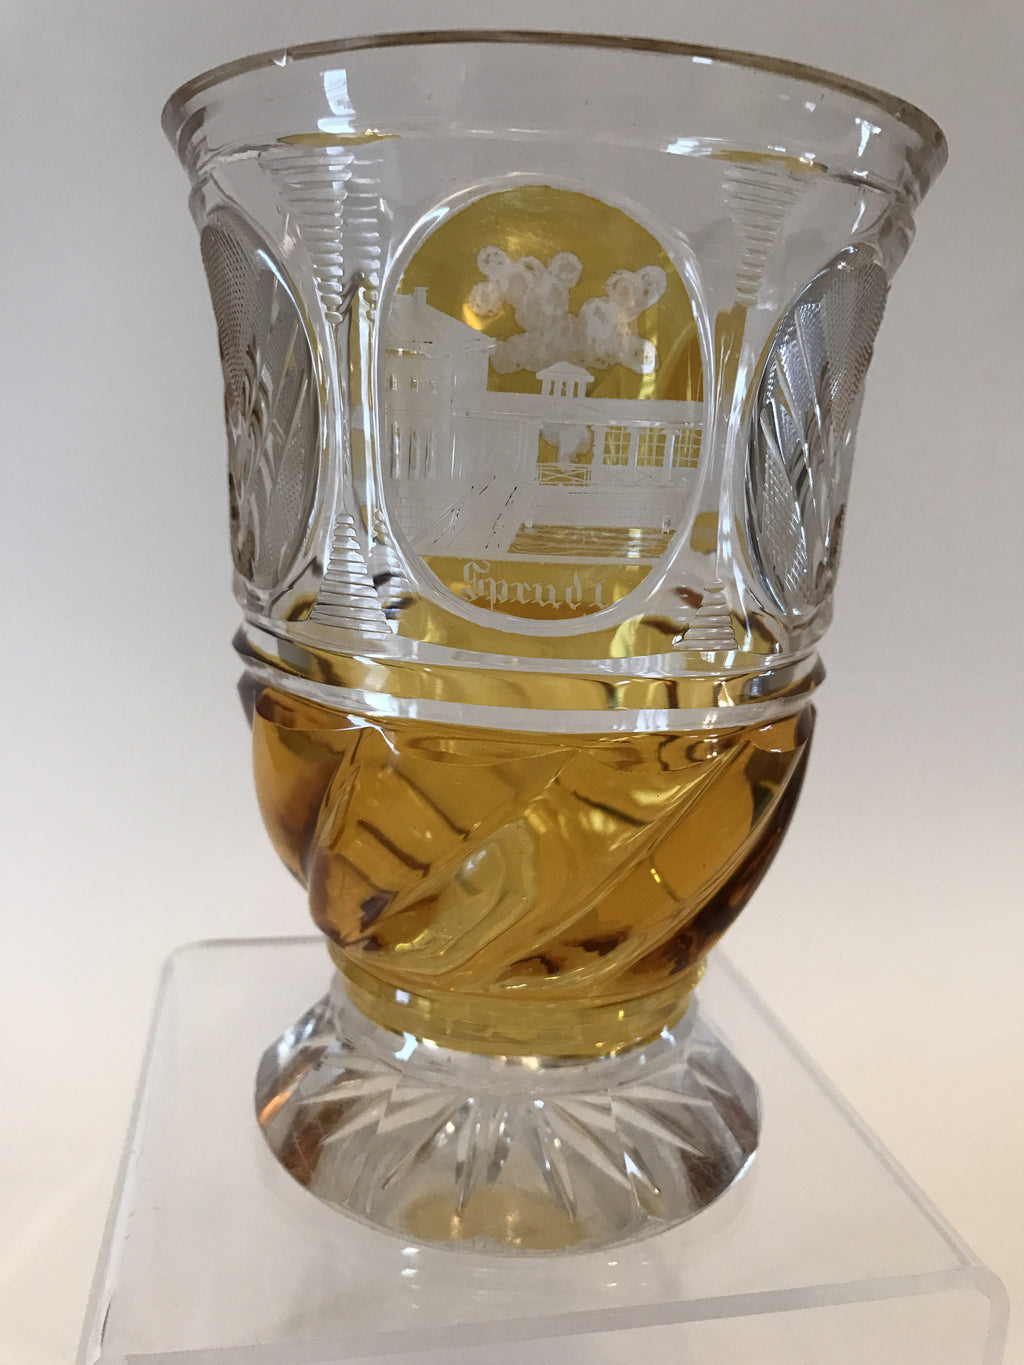 999325 Amber Flashed Glass With 3 Engraved Oval Panels & 3 Crystal Cut Panels Around Bottom Over Rounded Swirl, Cut Star Base, Bohemian Glassware, Antique, - ReeceFurniture.com - Free Local Pick Ups: Frankenmuth, MI, Indianapolis, IN, Chicago Ridge, IL, and Detroit, MI